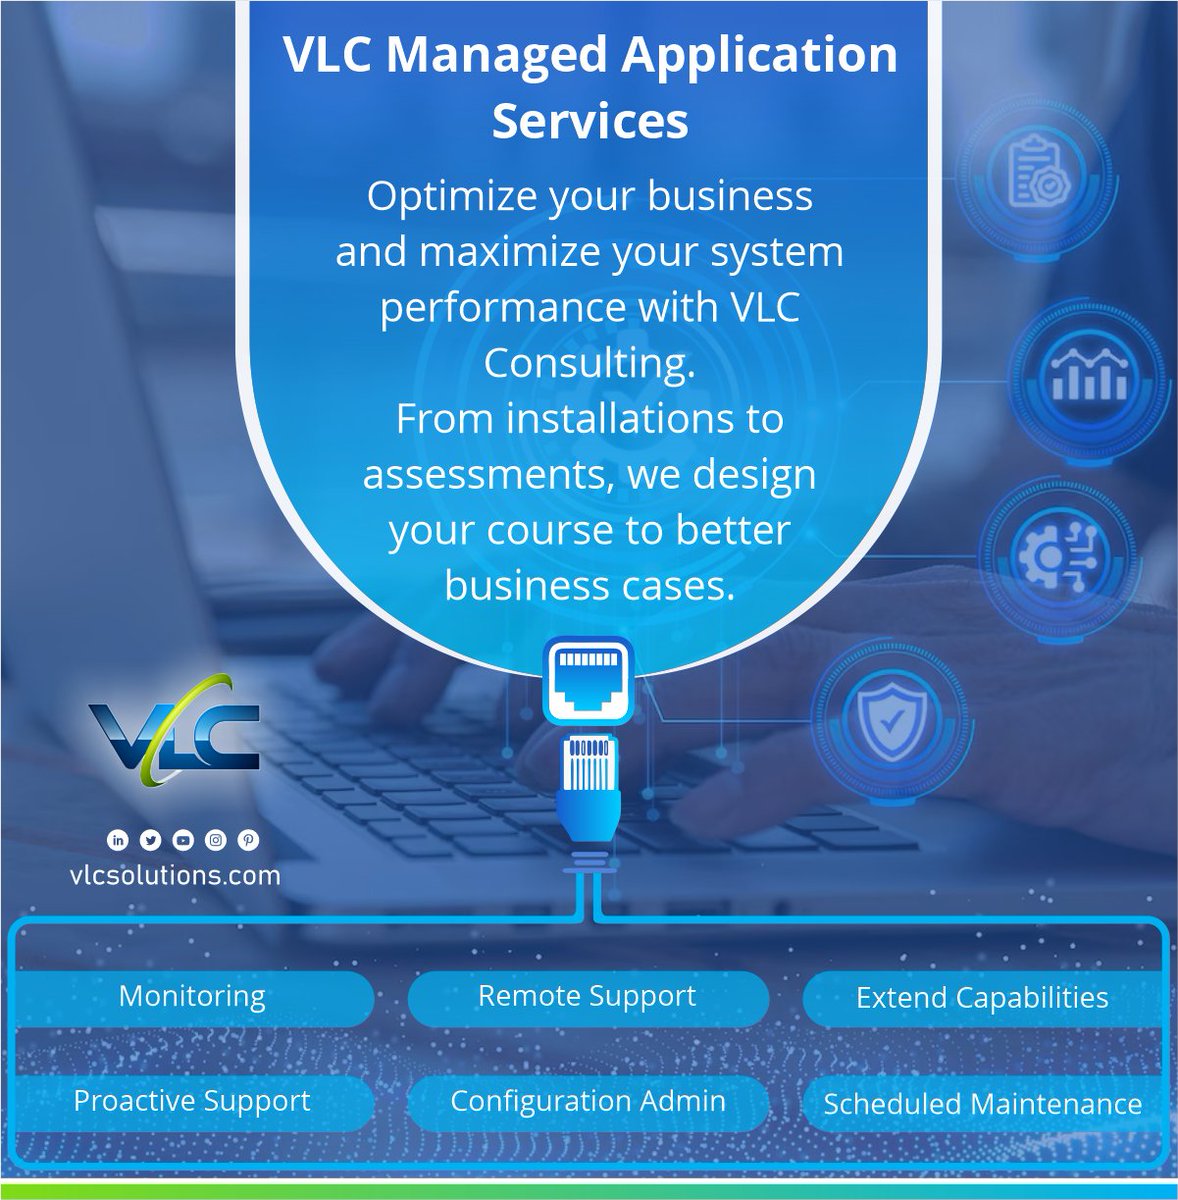 Achieve peak performance with VLC Managed Application Services. Our comprehensive approach ensures your systems are optimized for success. vlcsolutions.com/managed-applic… #VLCConsulting #Managedservices